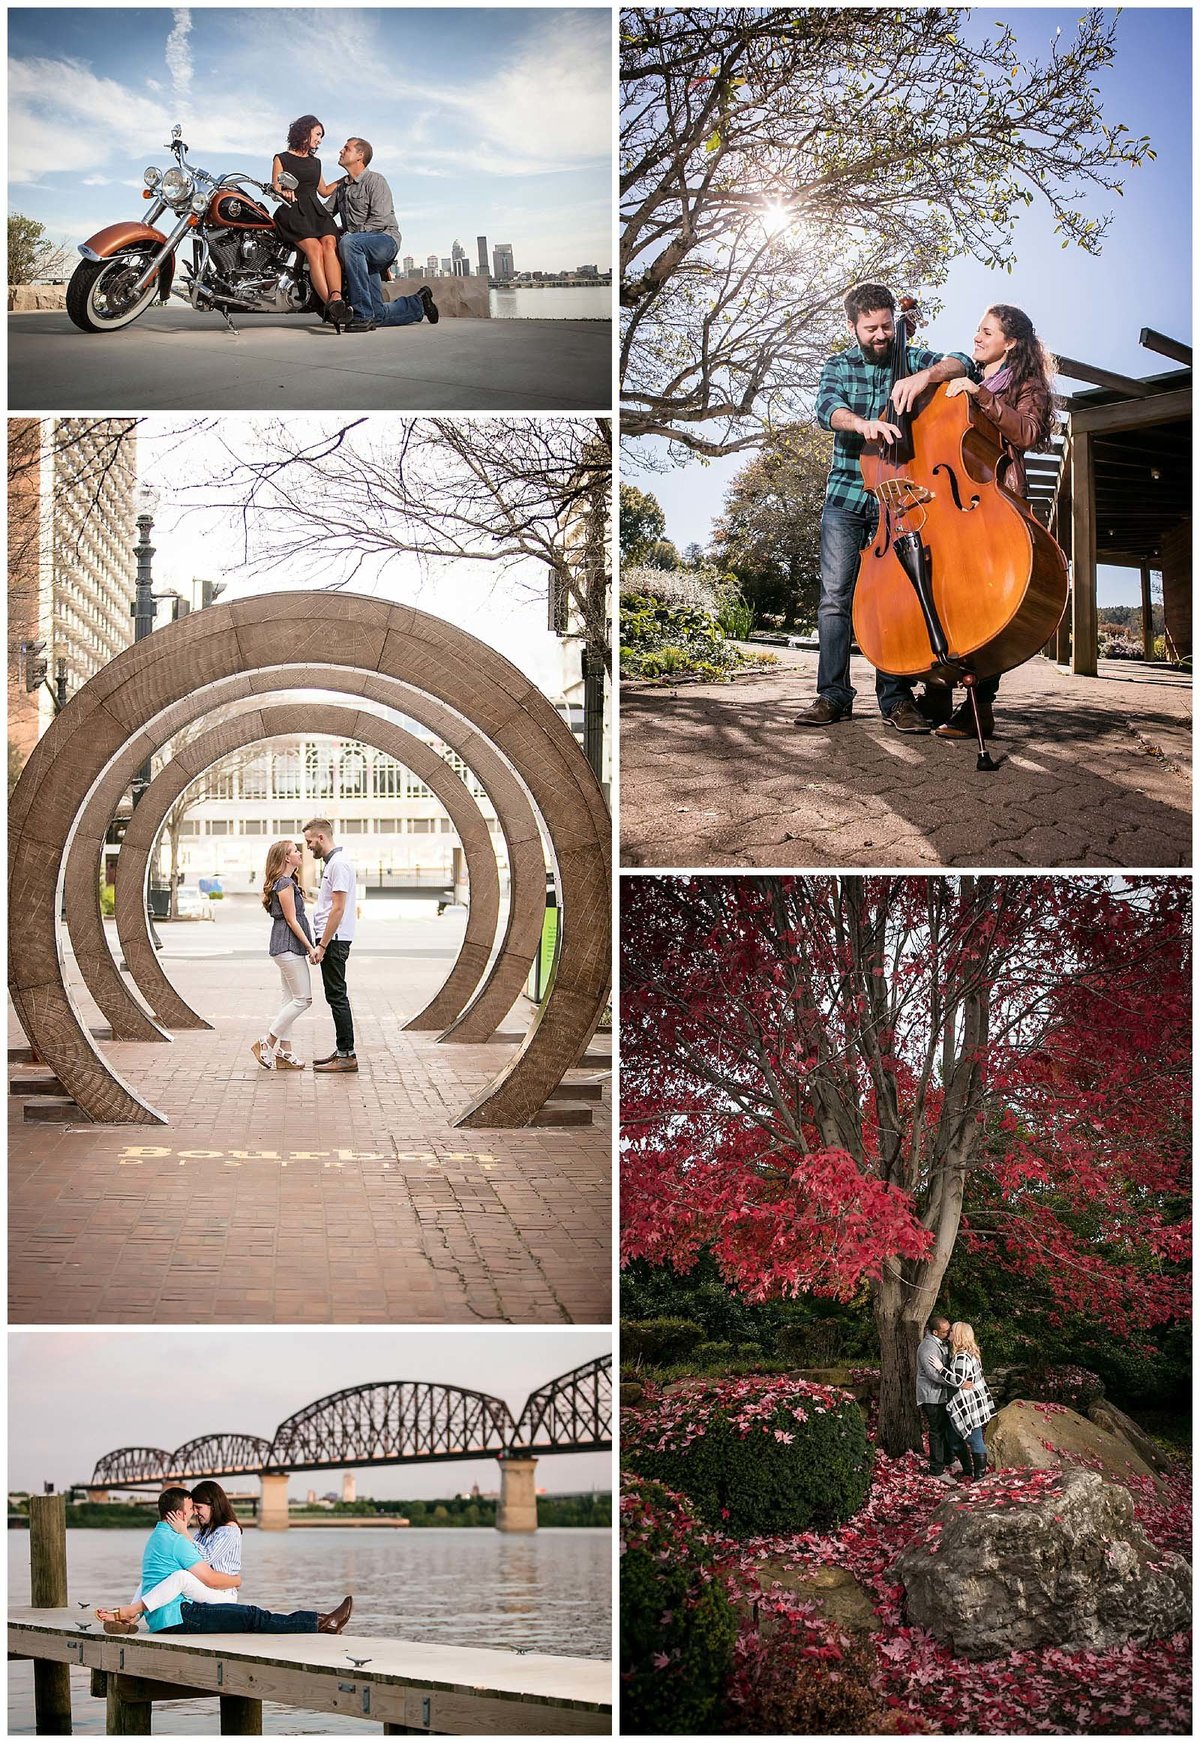 Couples include hobbies during their engagement session.  Motorcycles, Music, Romance, and hometowns.